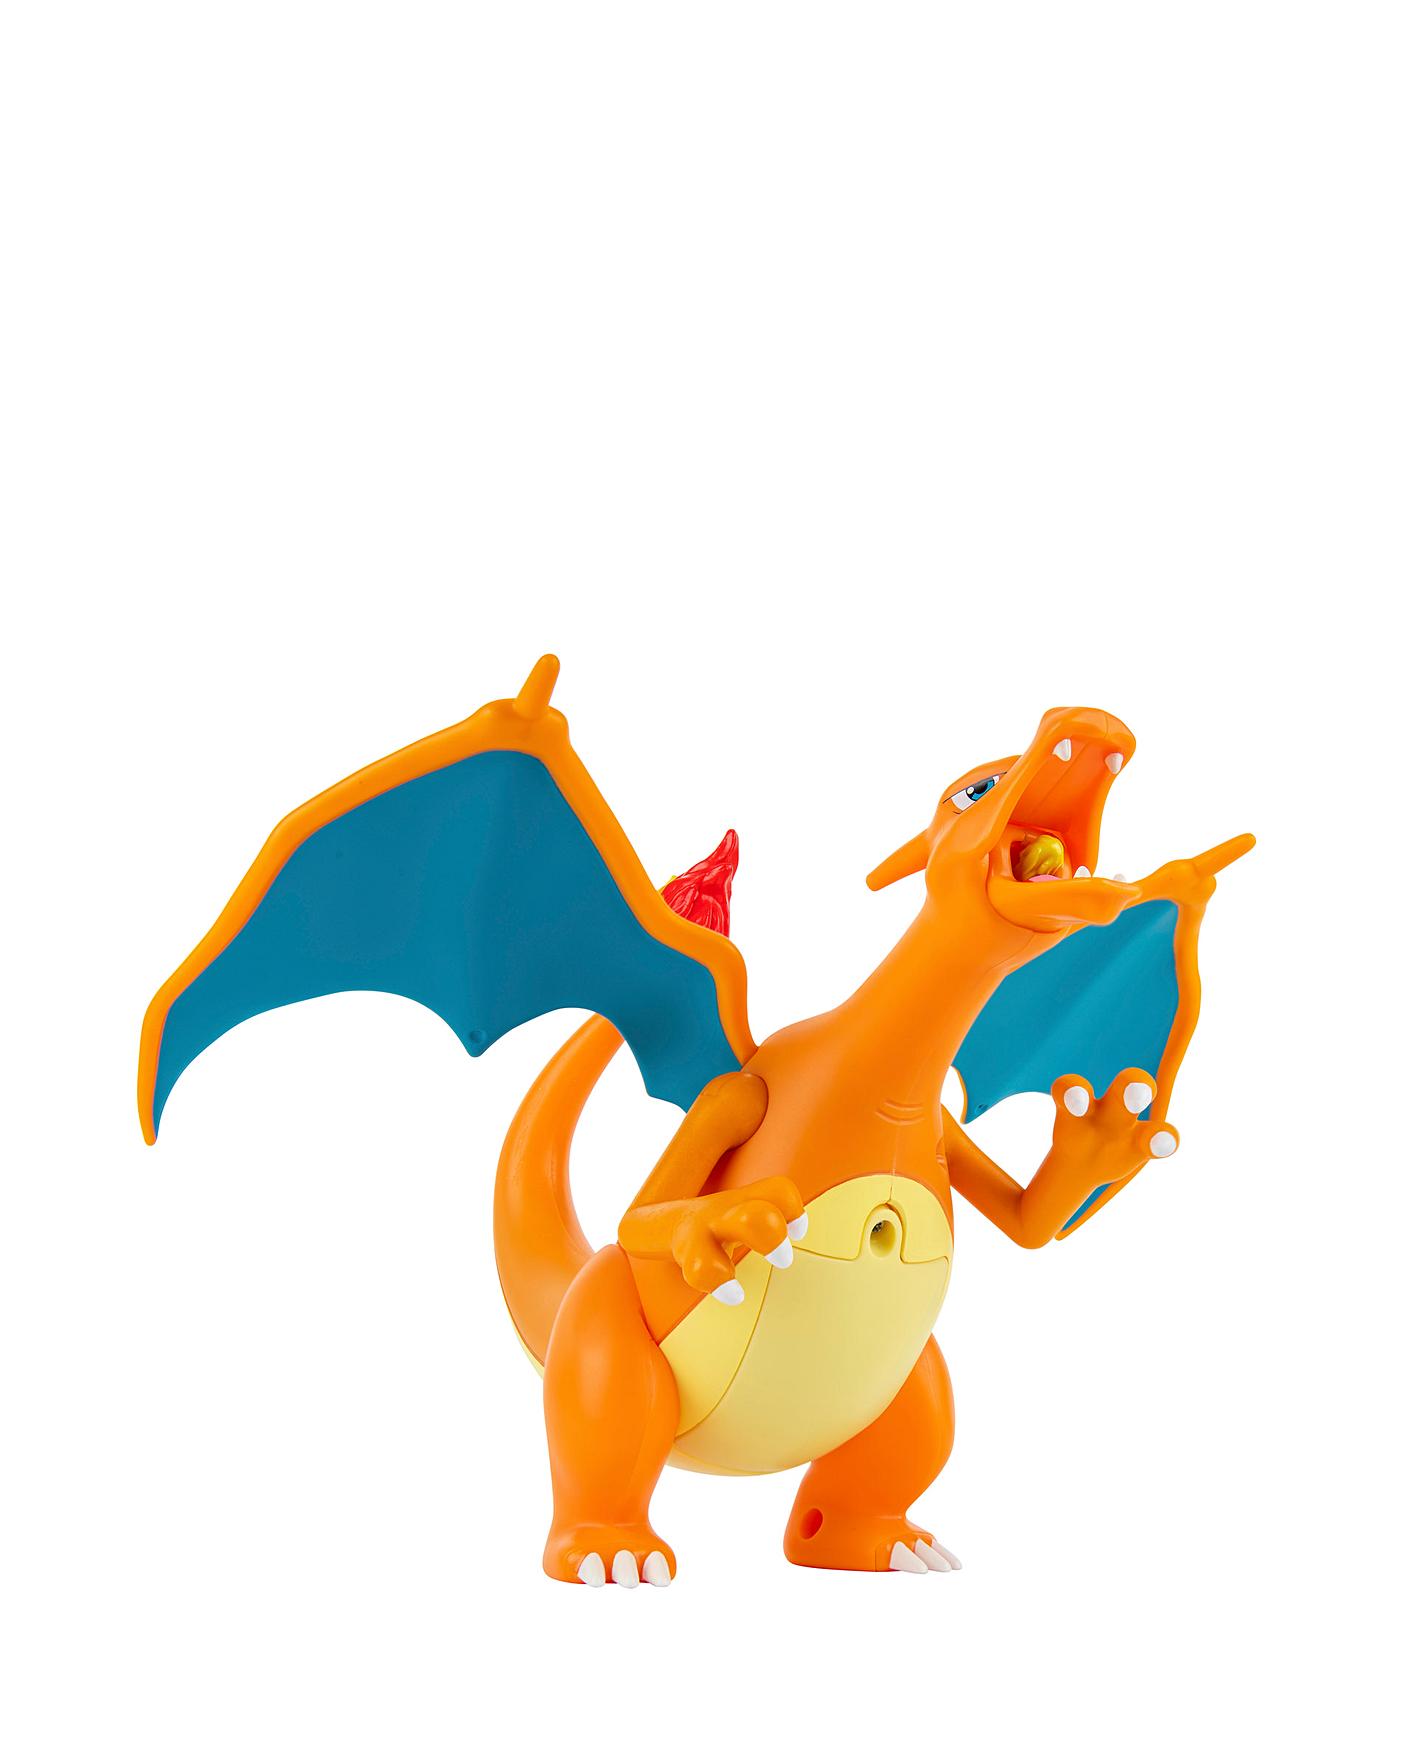 Surprise! Charizard has two Mega Evolutions in Pokémon X and Y